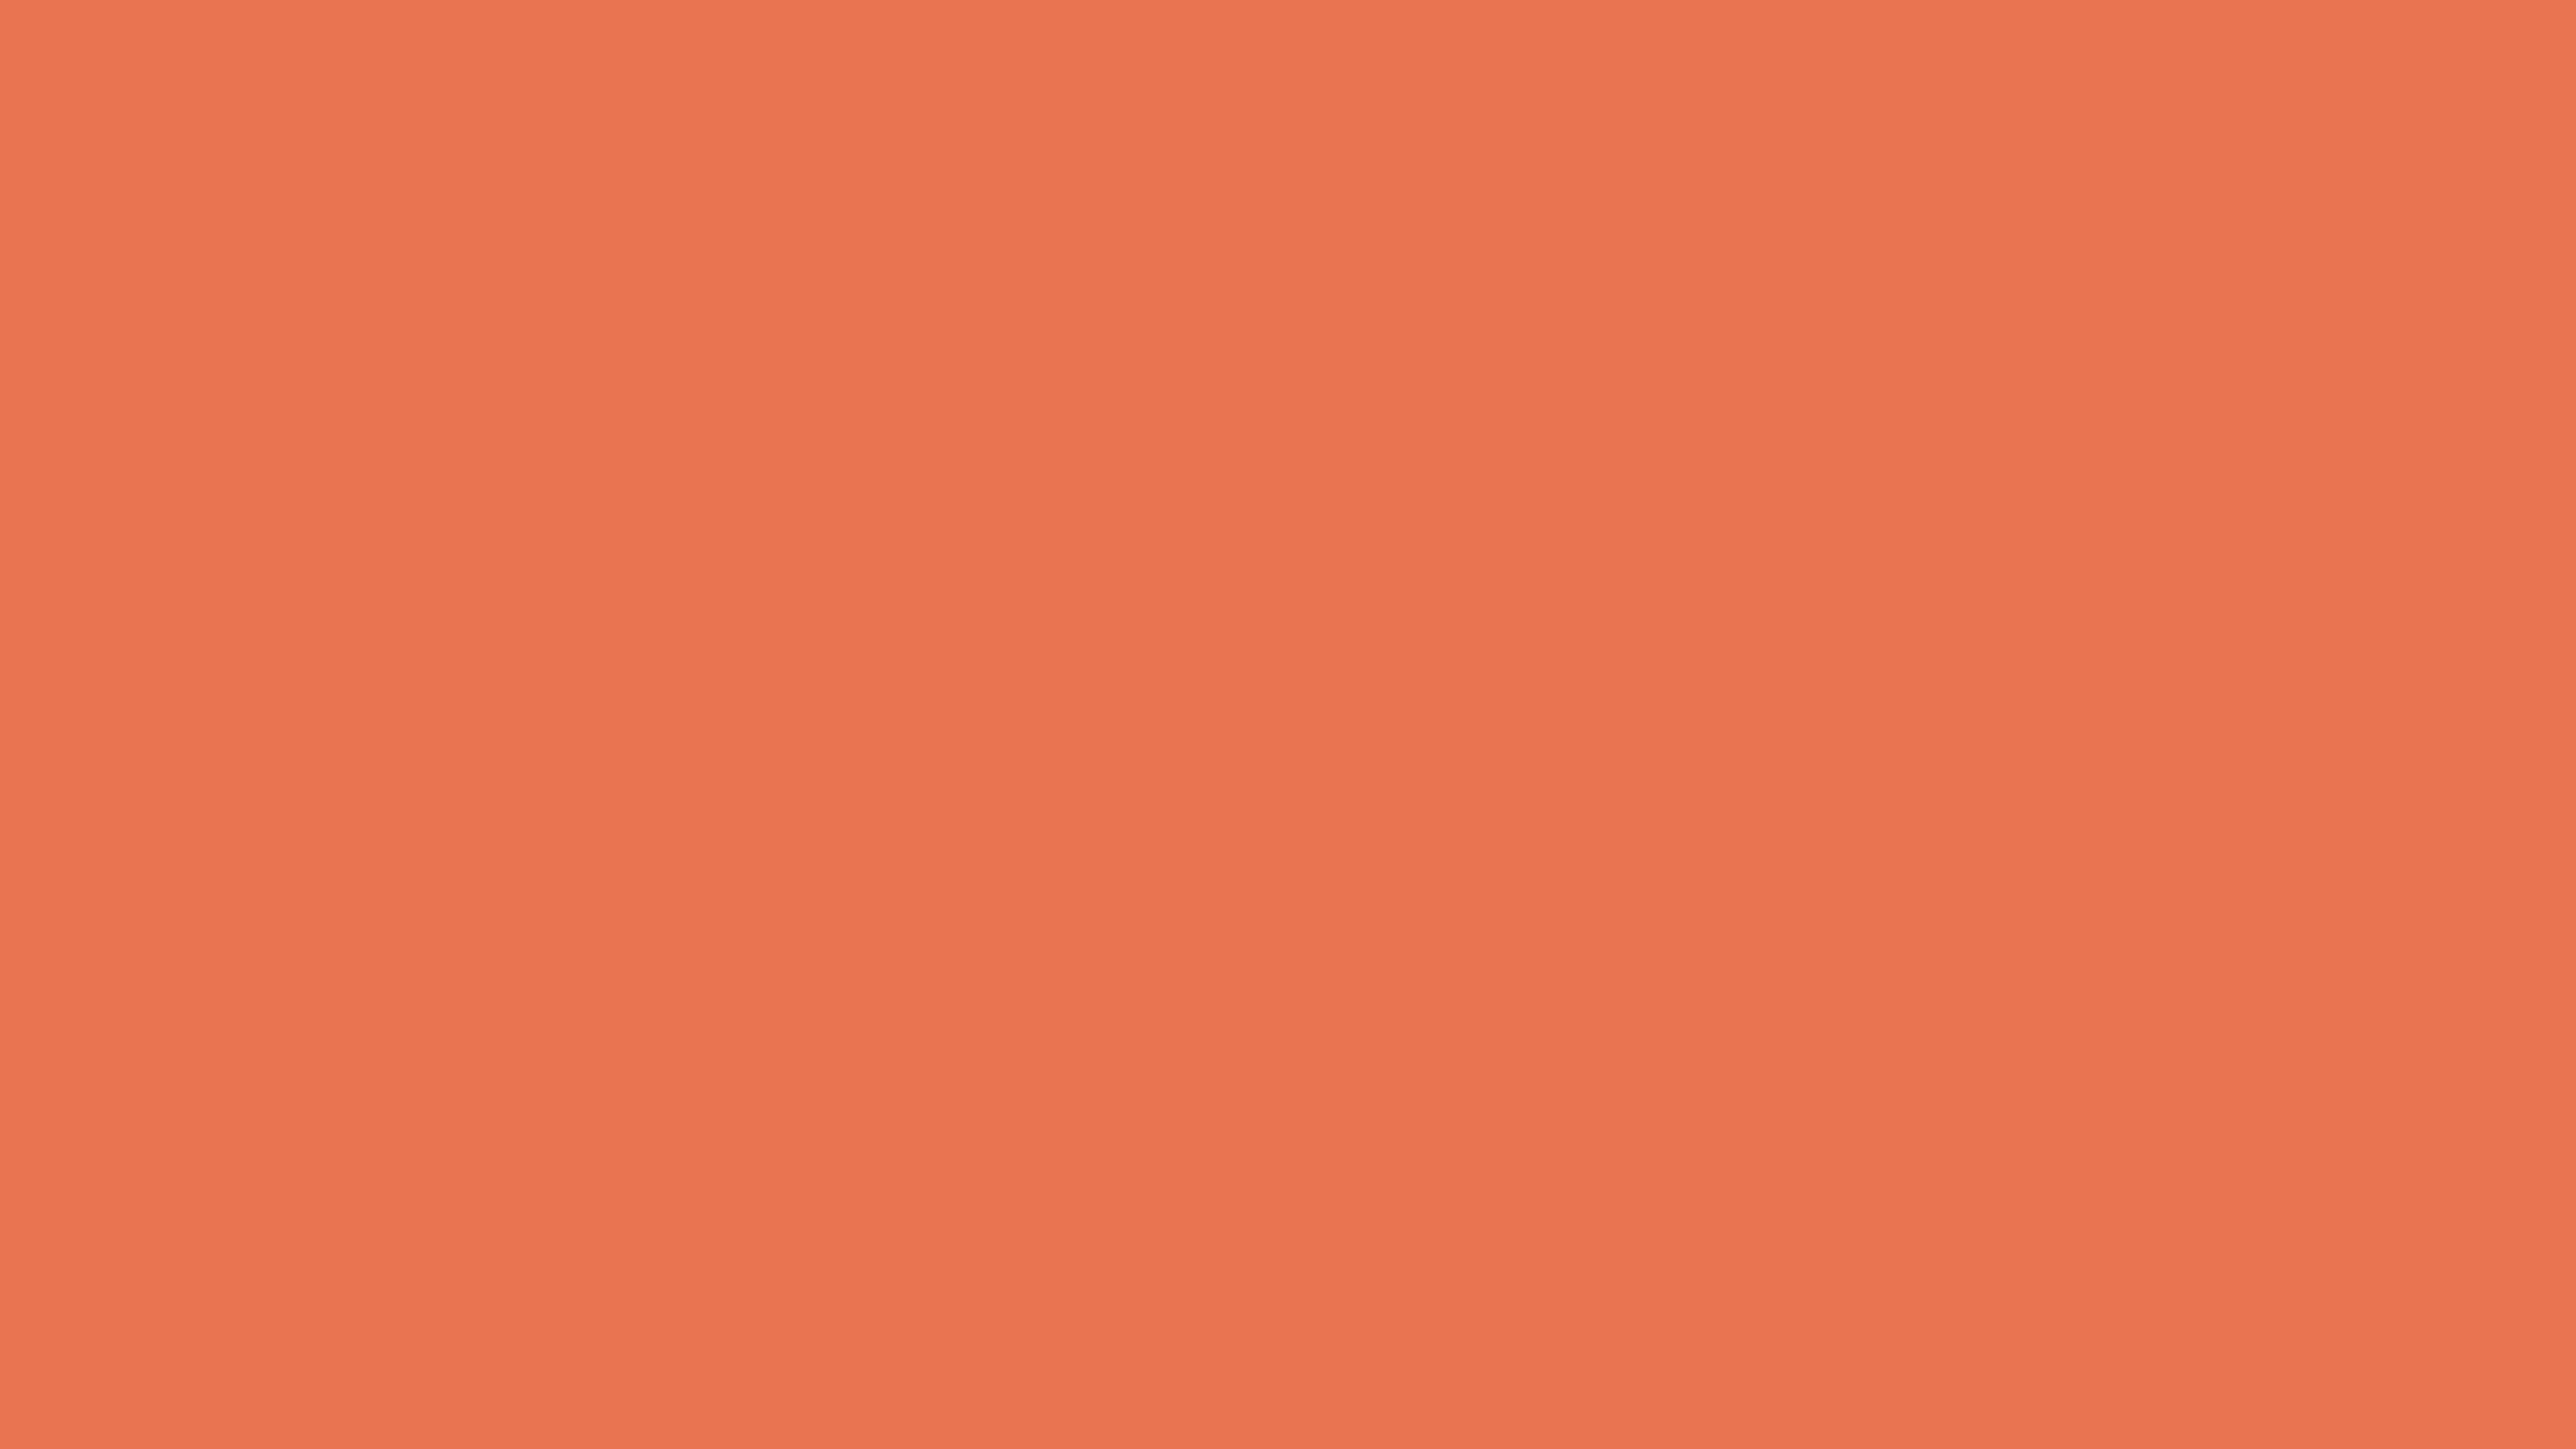 7680x4320 Burnt Sienna Solid Color Background